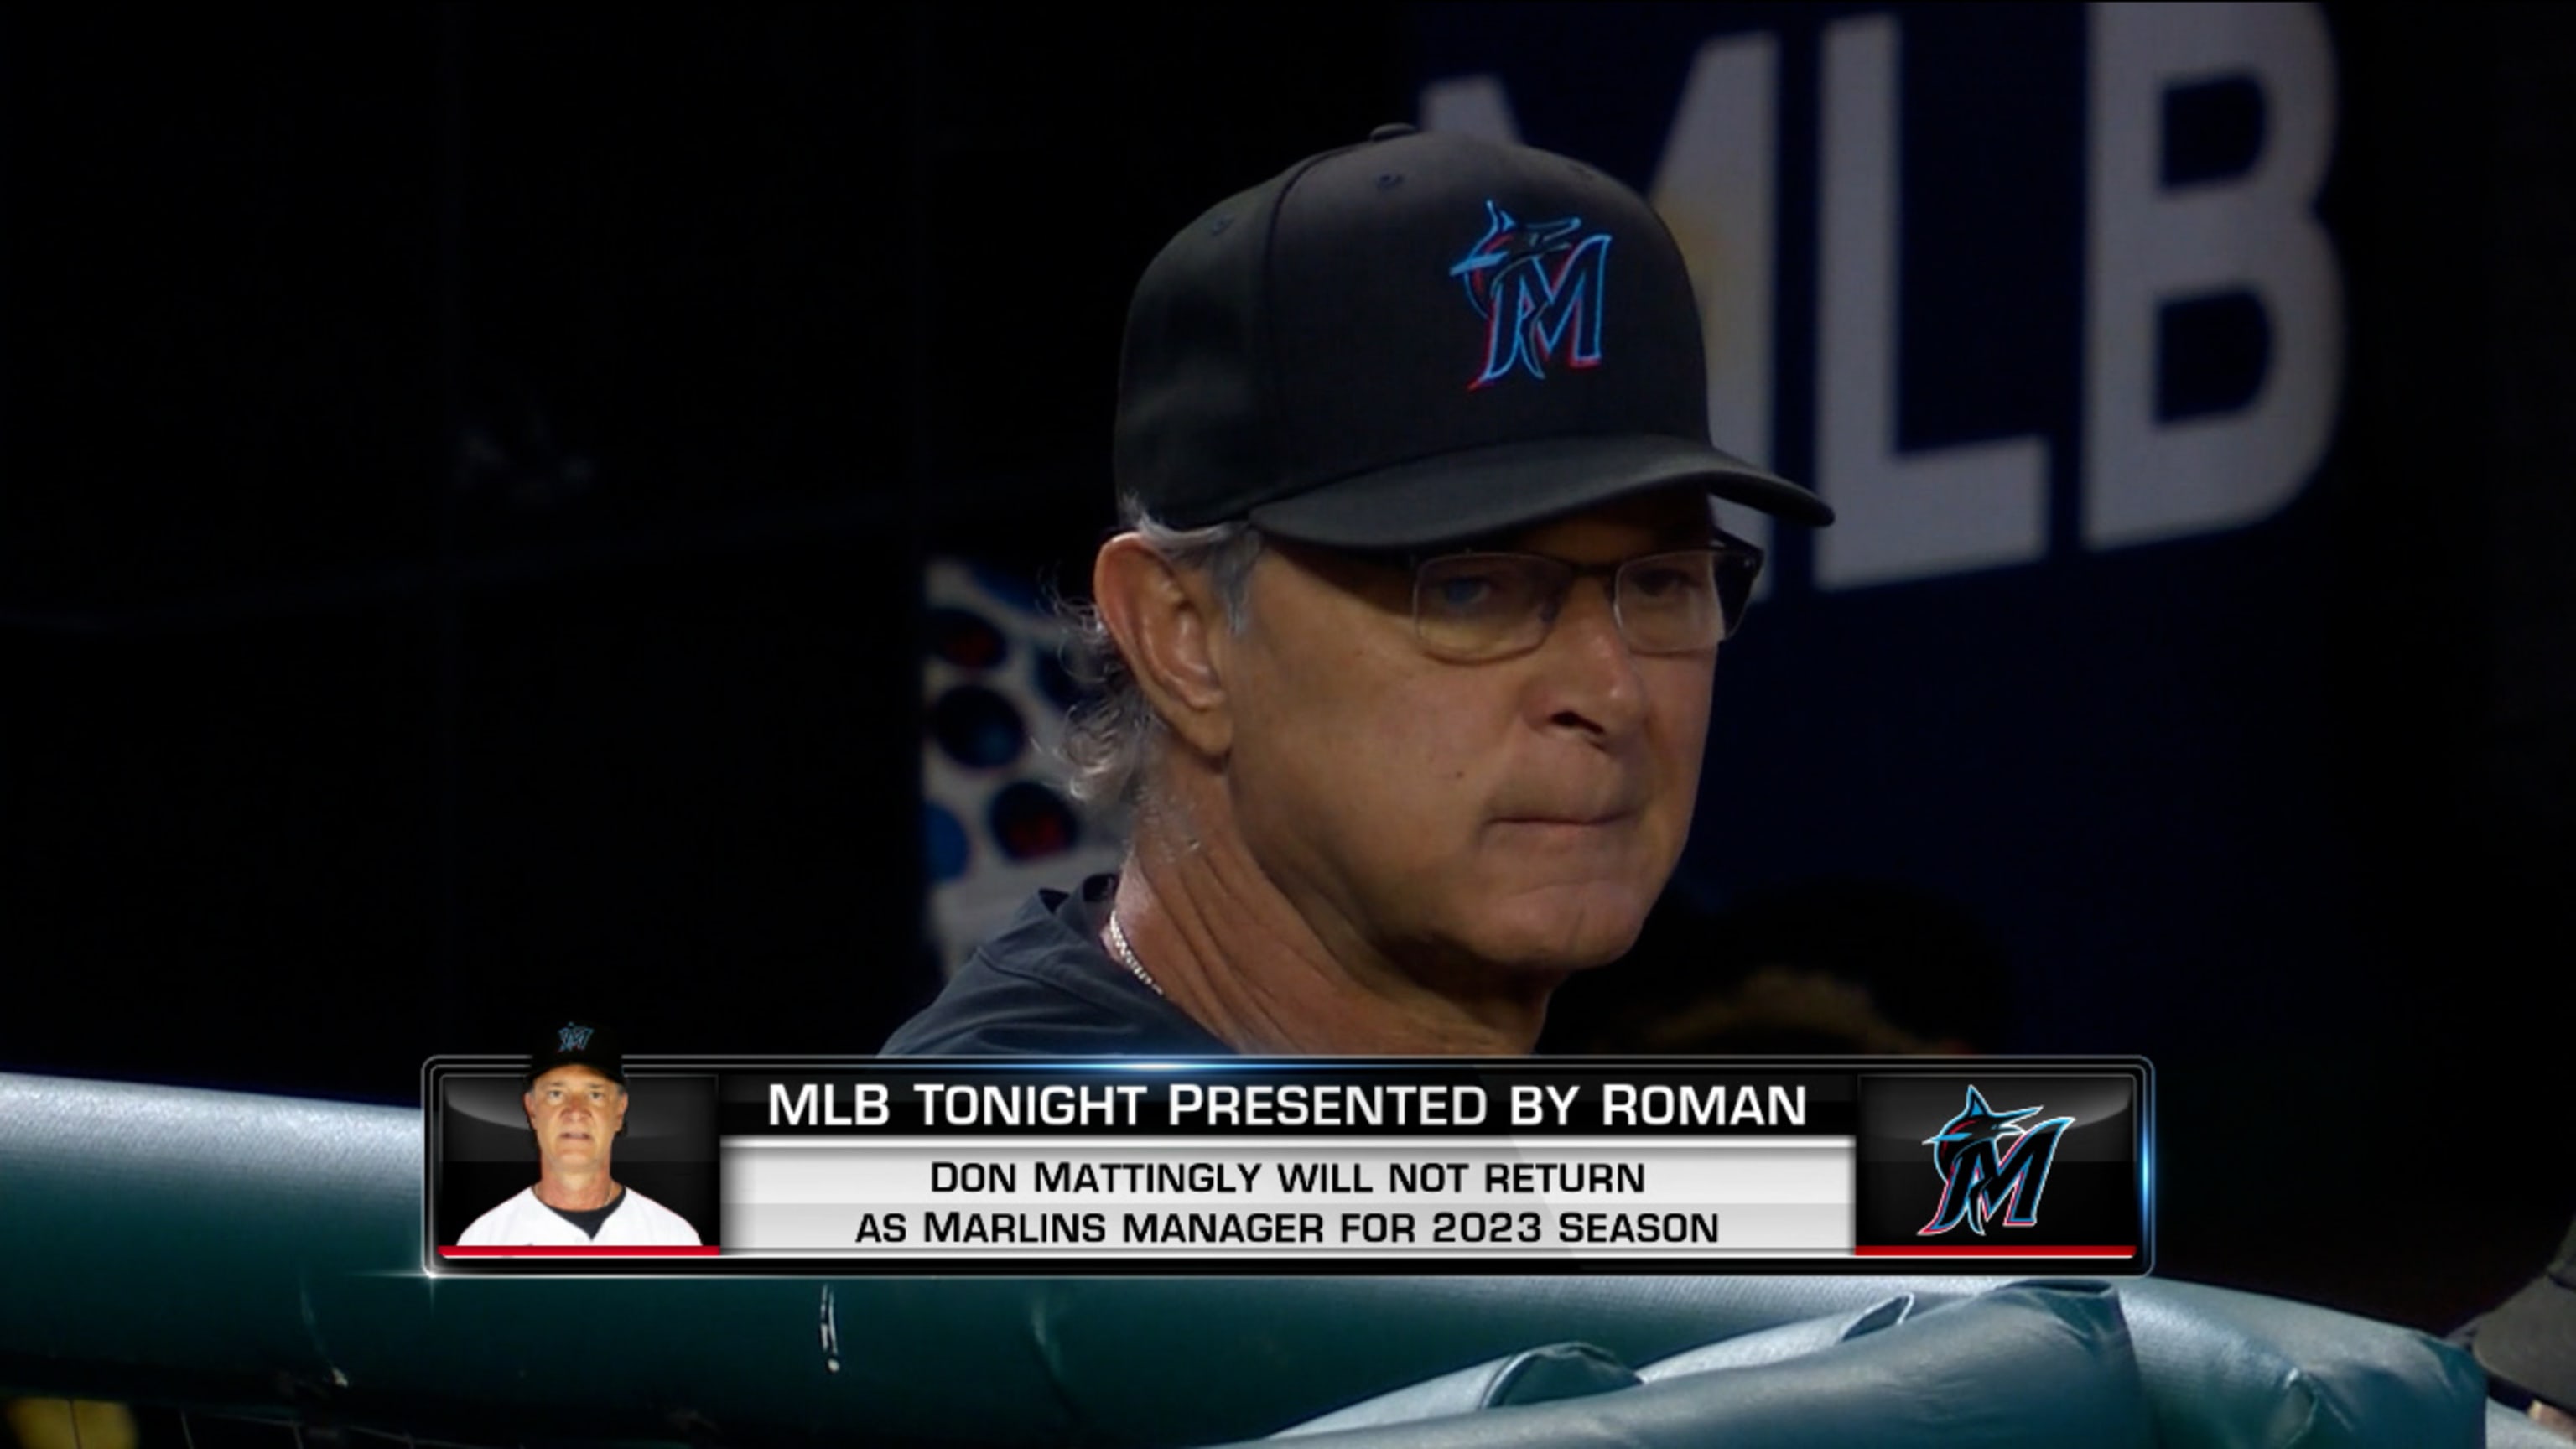 Don Mattingly's tenure as Marlins manager ends